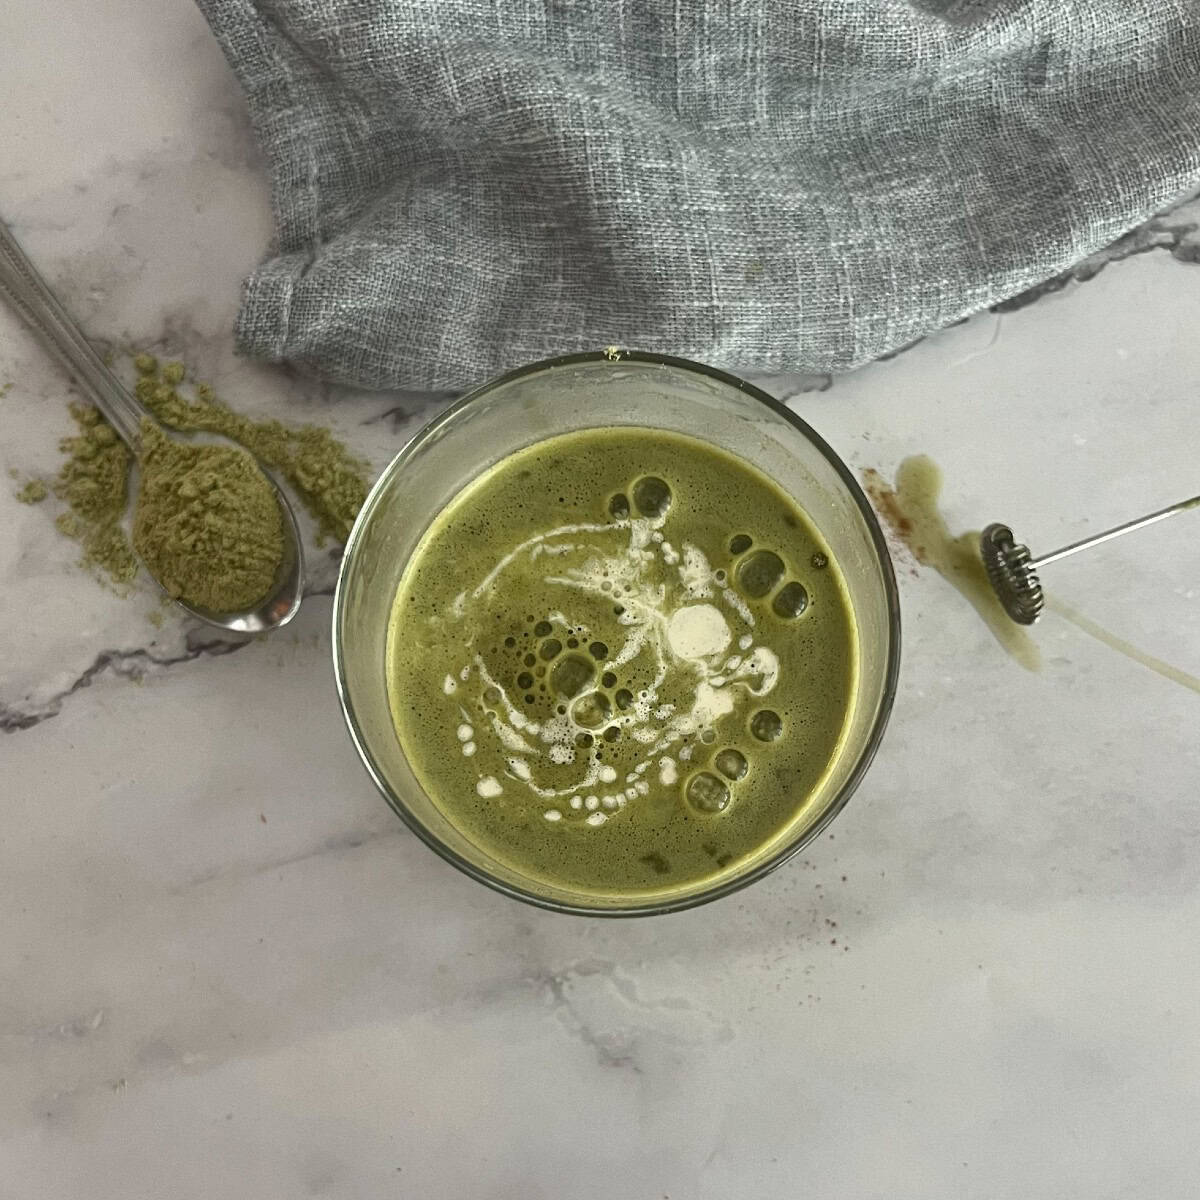 A close-up of a glass filled with a green matcha latte. The latte has a frothy layer on top and is garnished with a sprinkle of matcha powder on a marble countertop. Matcha powder is a finely ground green tea powder that is used in traditional Japanese tea ceremonies and other recipes.